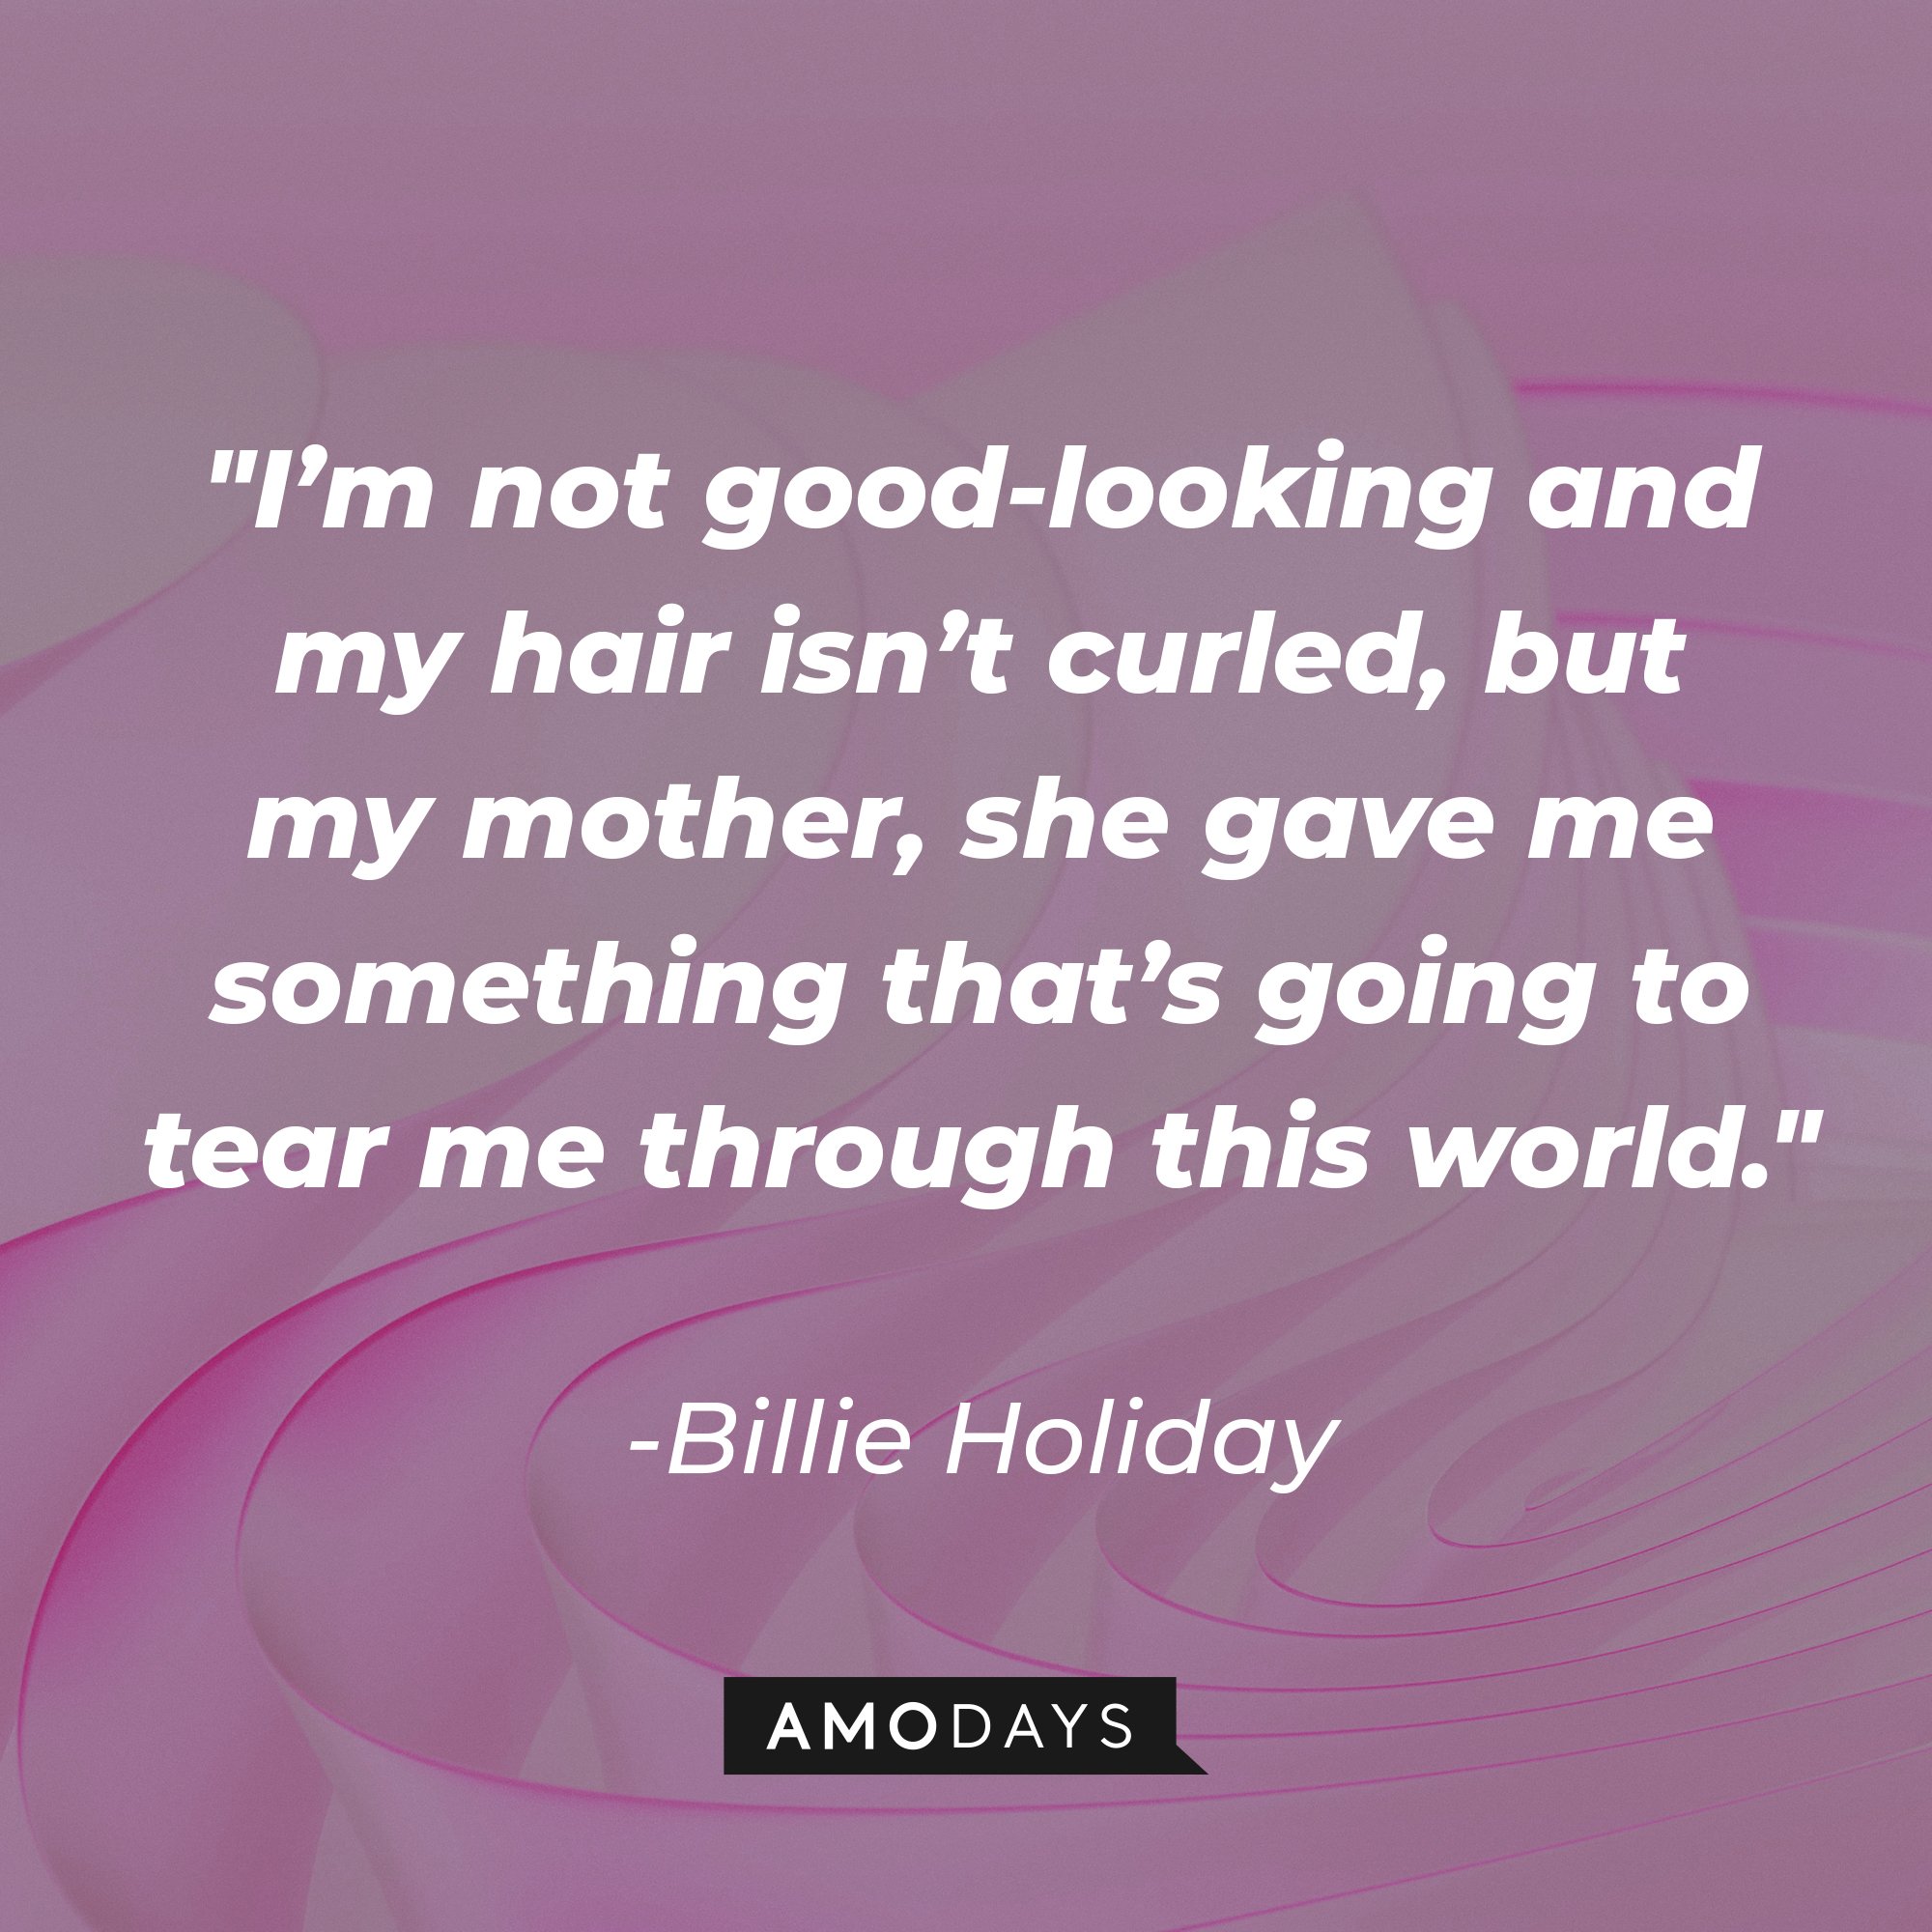 Billie Holiday's quote "I’m not good-looking and my hair isn’t curled, but my mother, she gave me something that’s going to tear me through this world." | Source: Unsplash.com